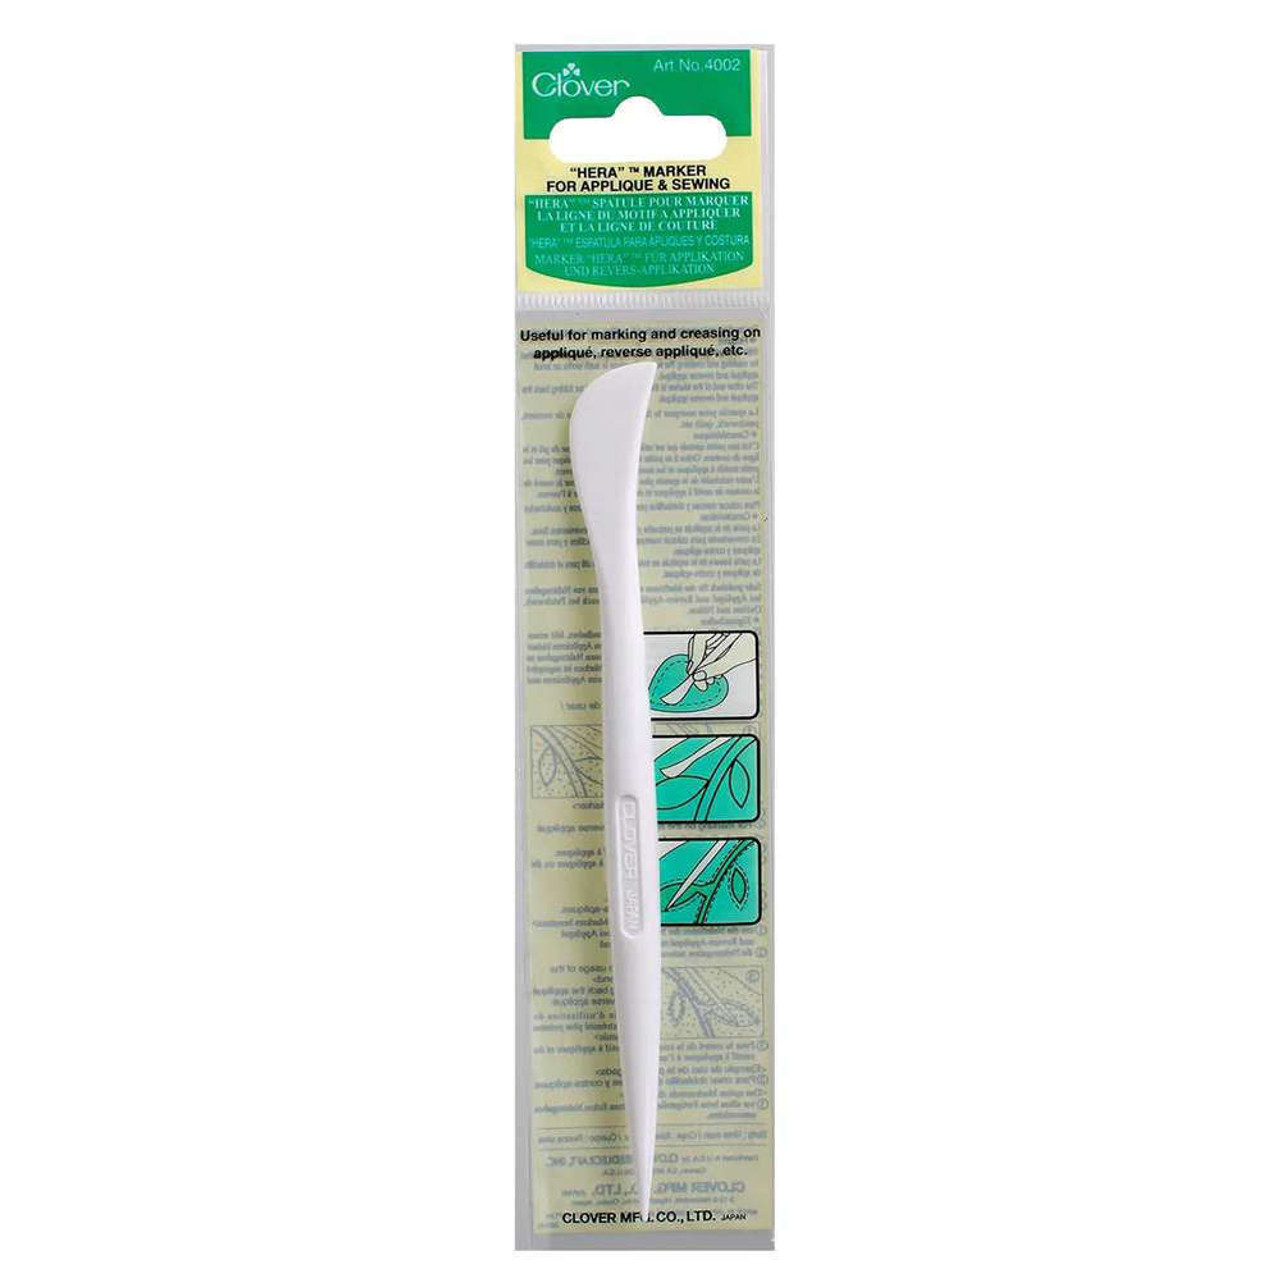 Clover Hera Marker For Applique & Sewing - Old Mill Quilting